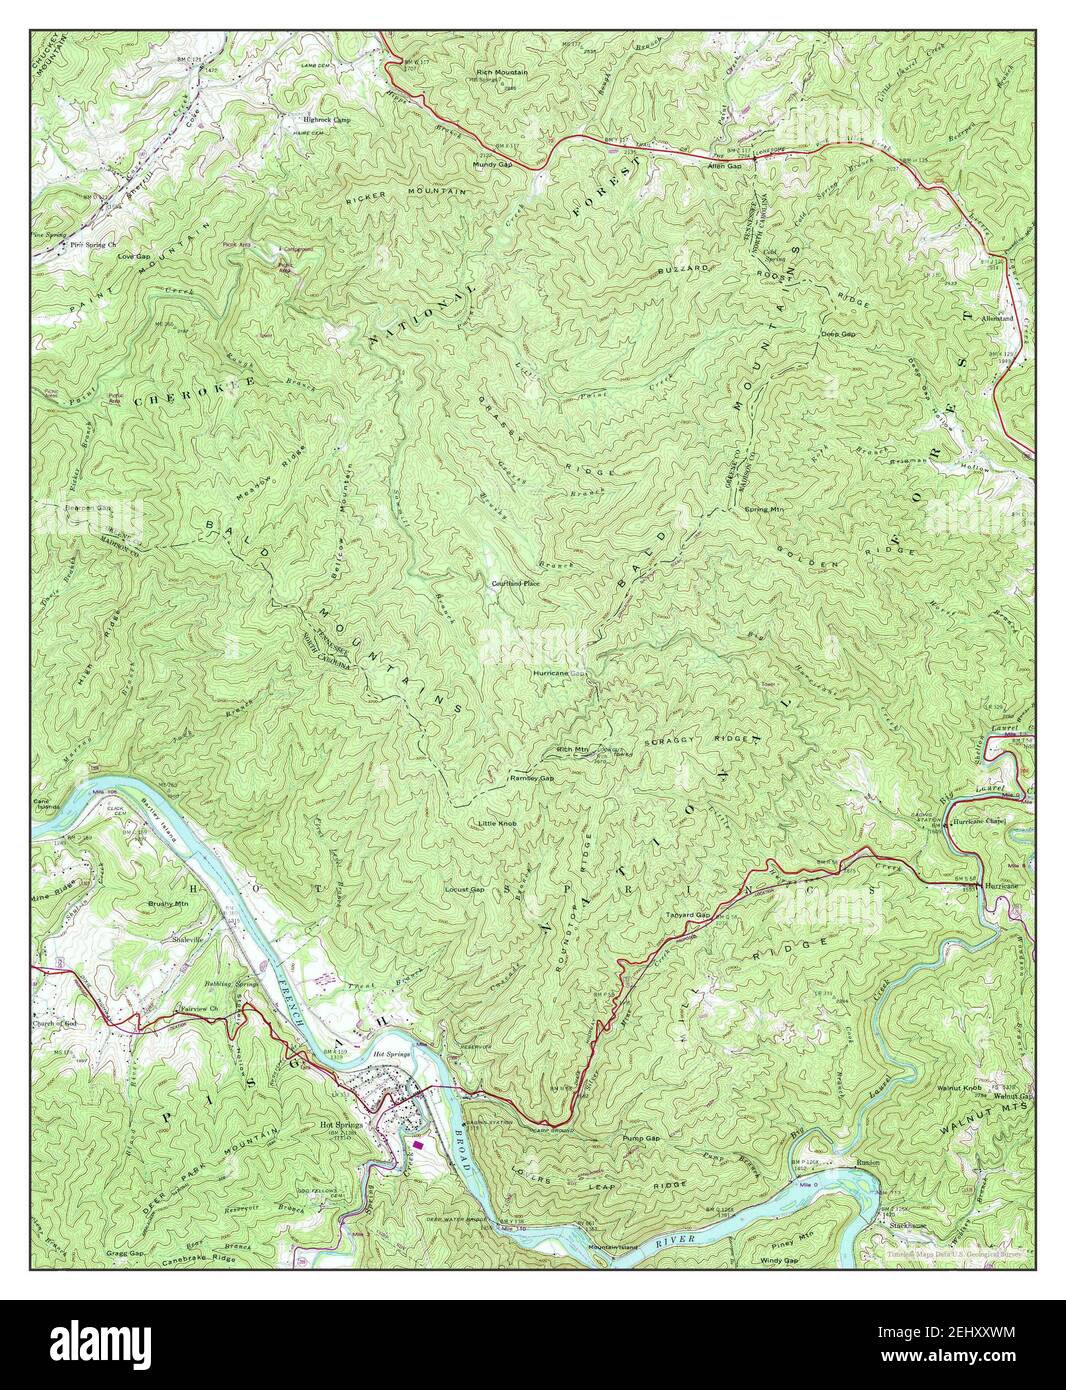 Hot Springs North Carolina Map 1940 124000 United States Of America By Timeless Maps Data 2358